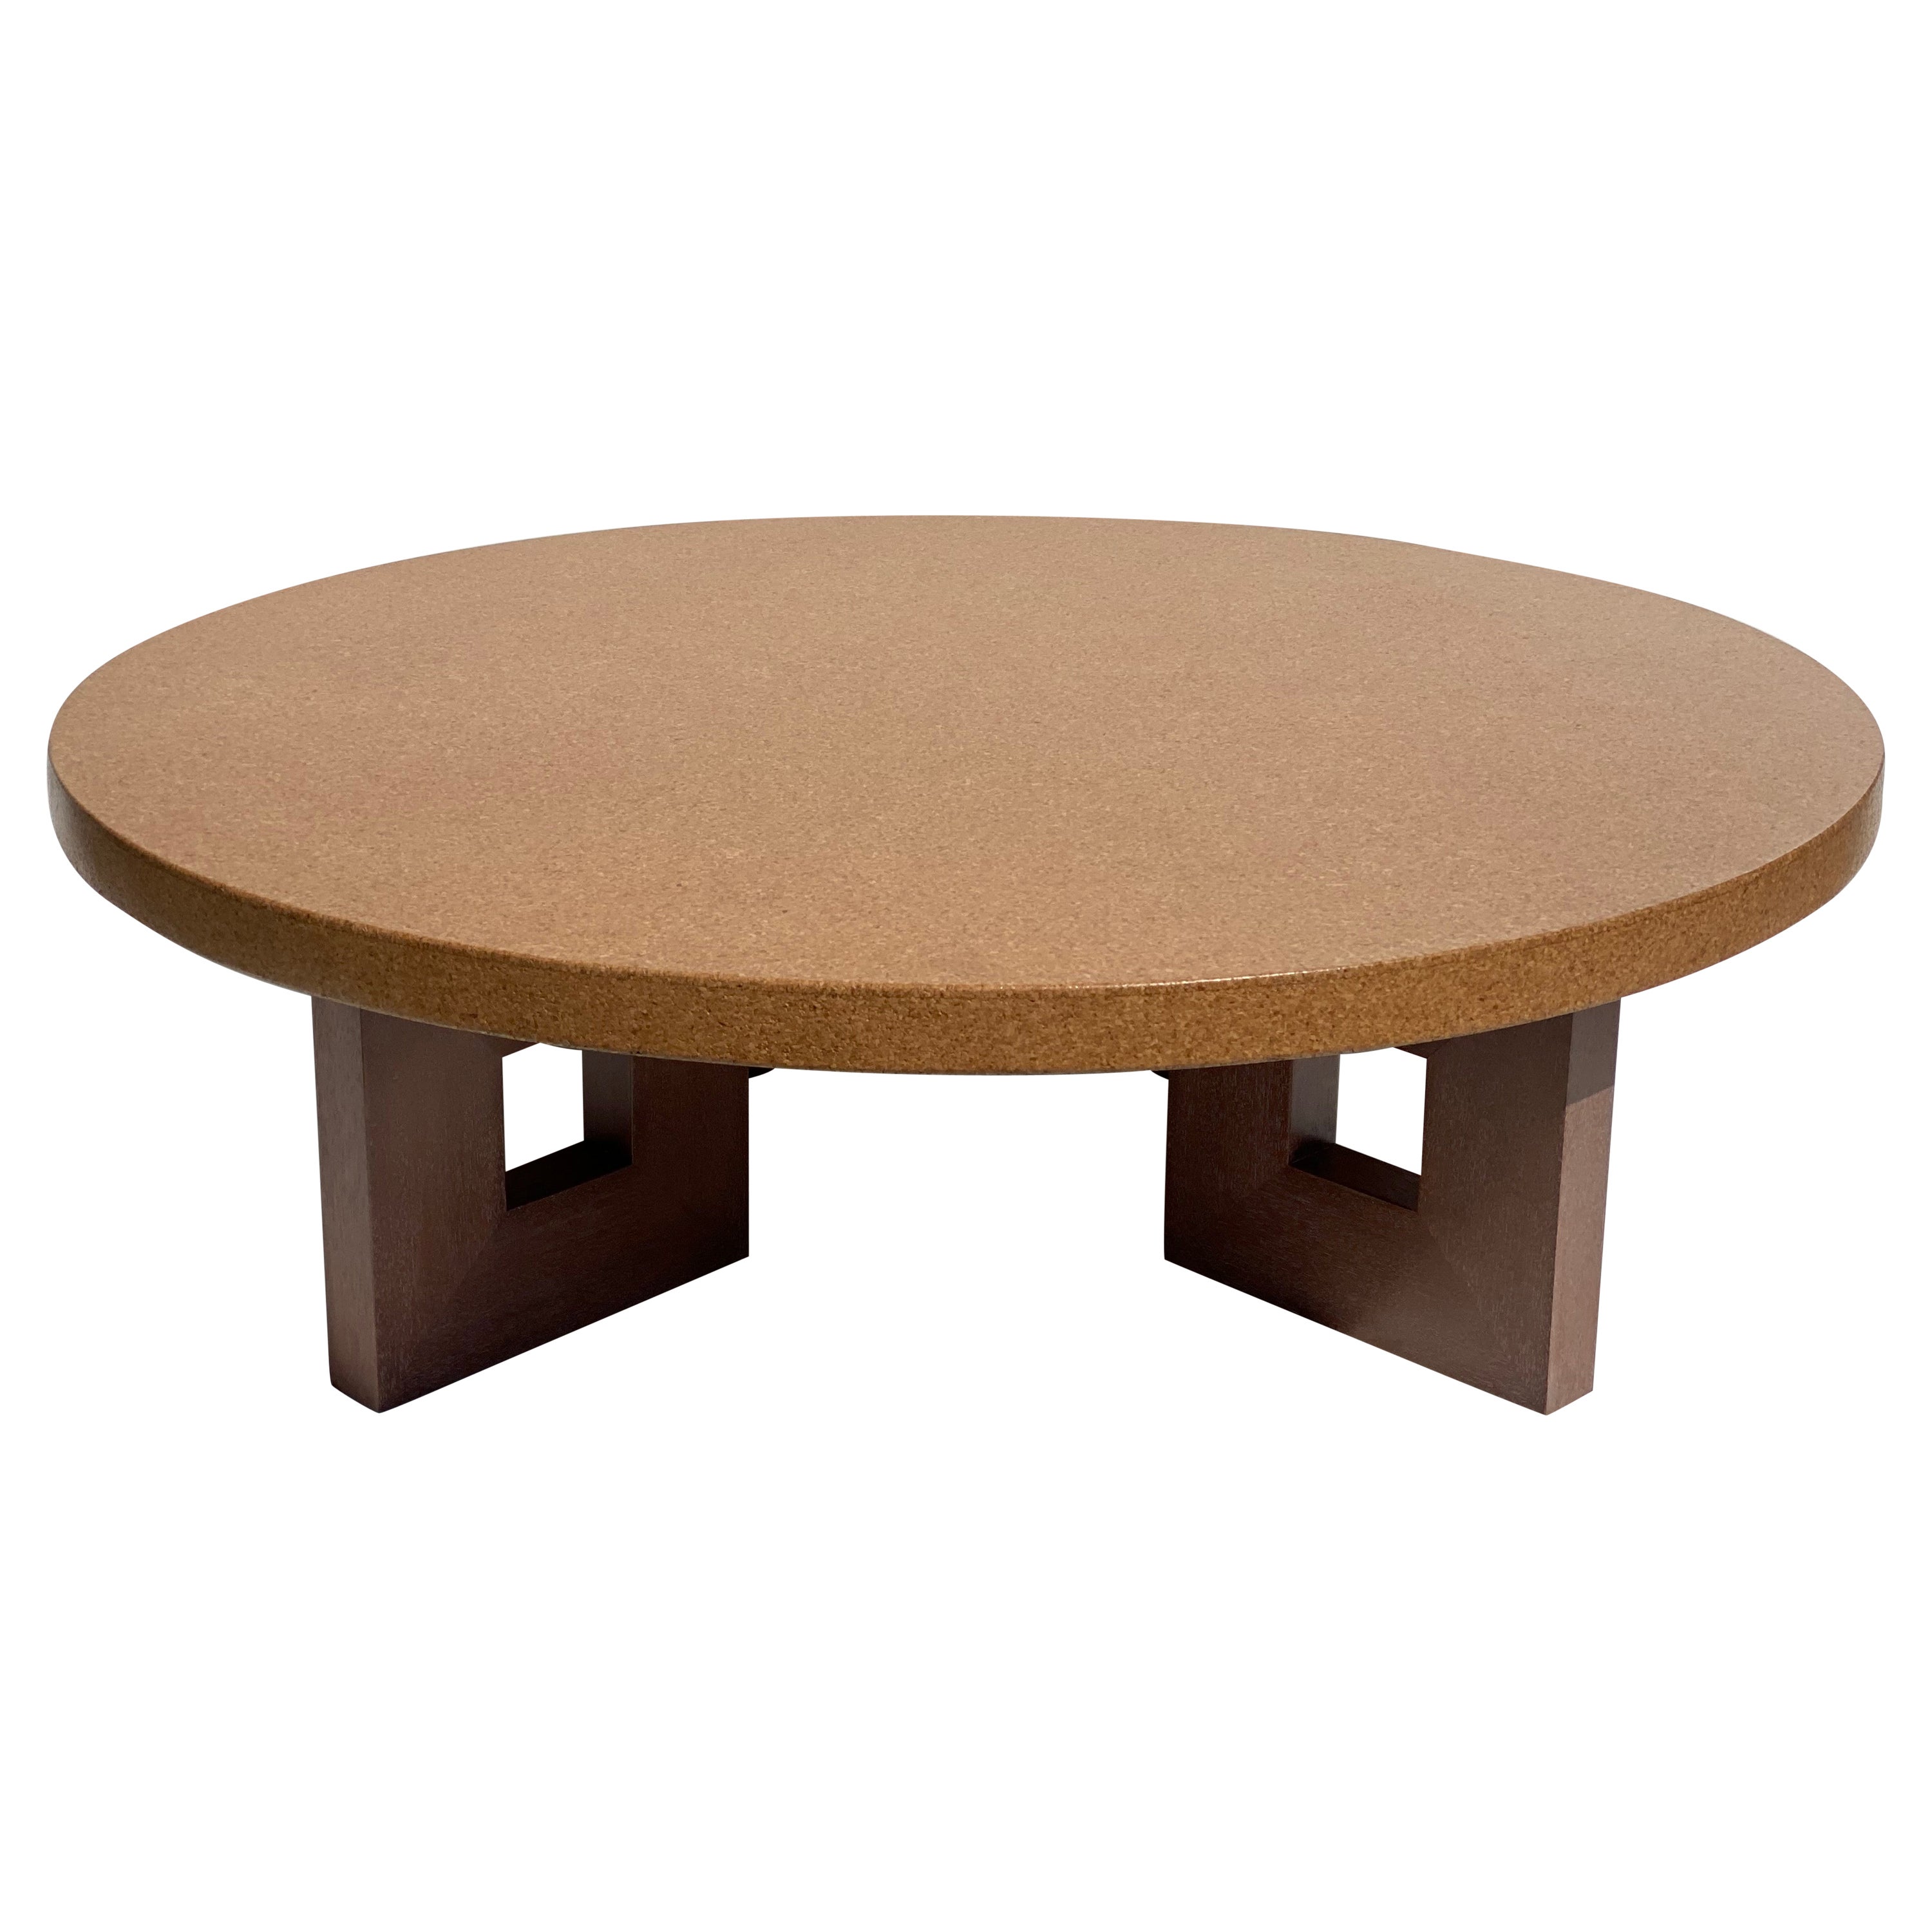 Round Cork Coffee Table For Sale